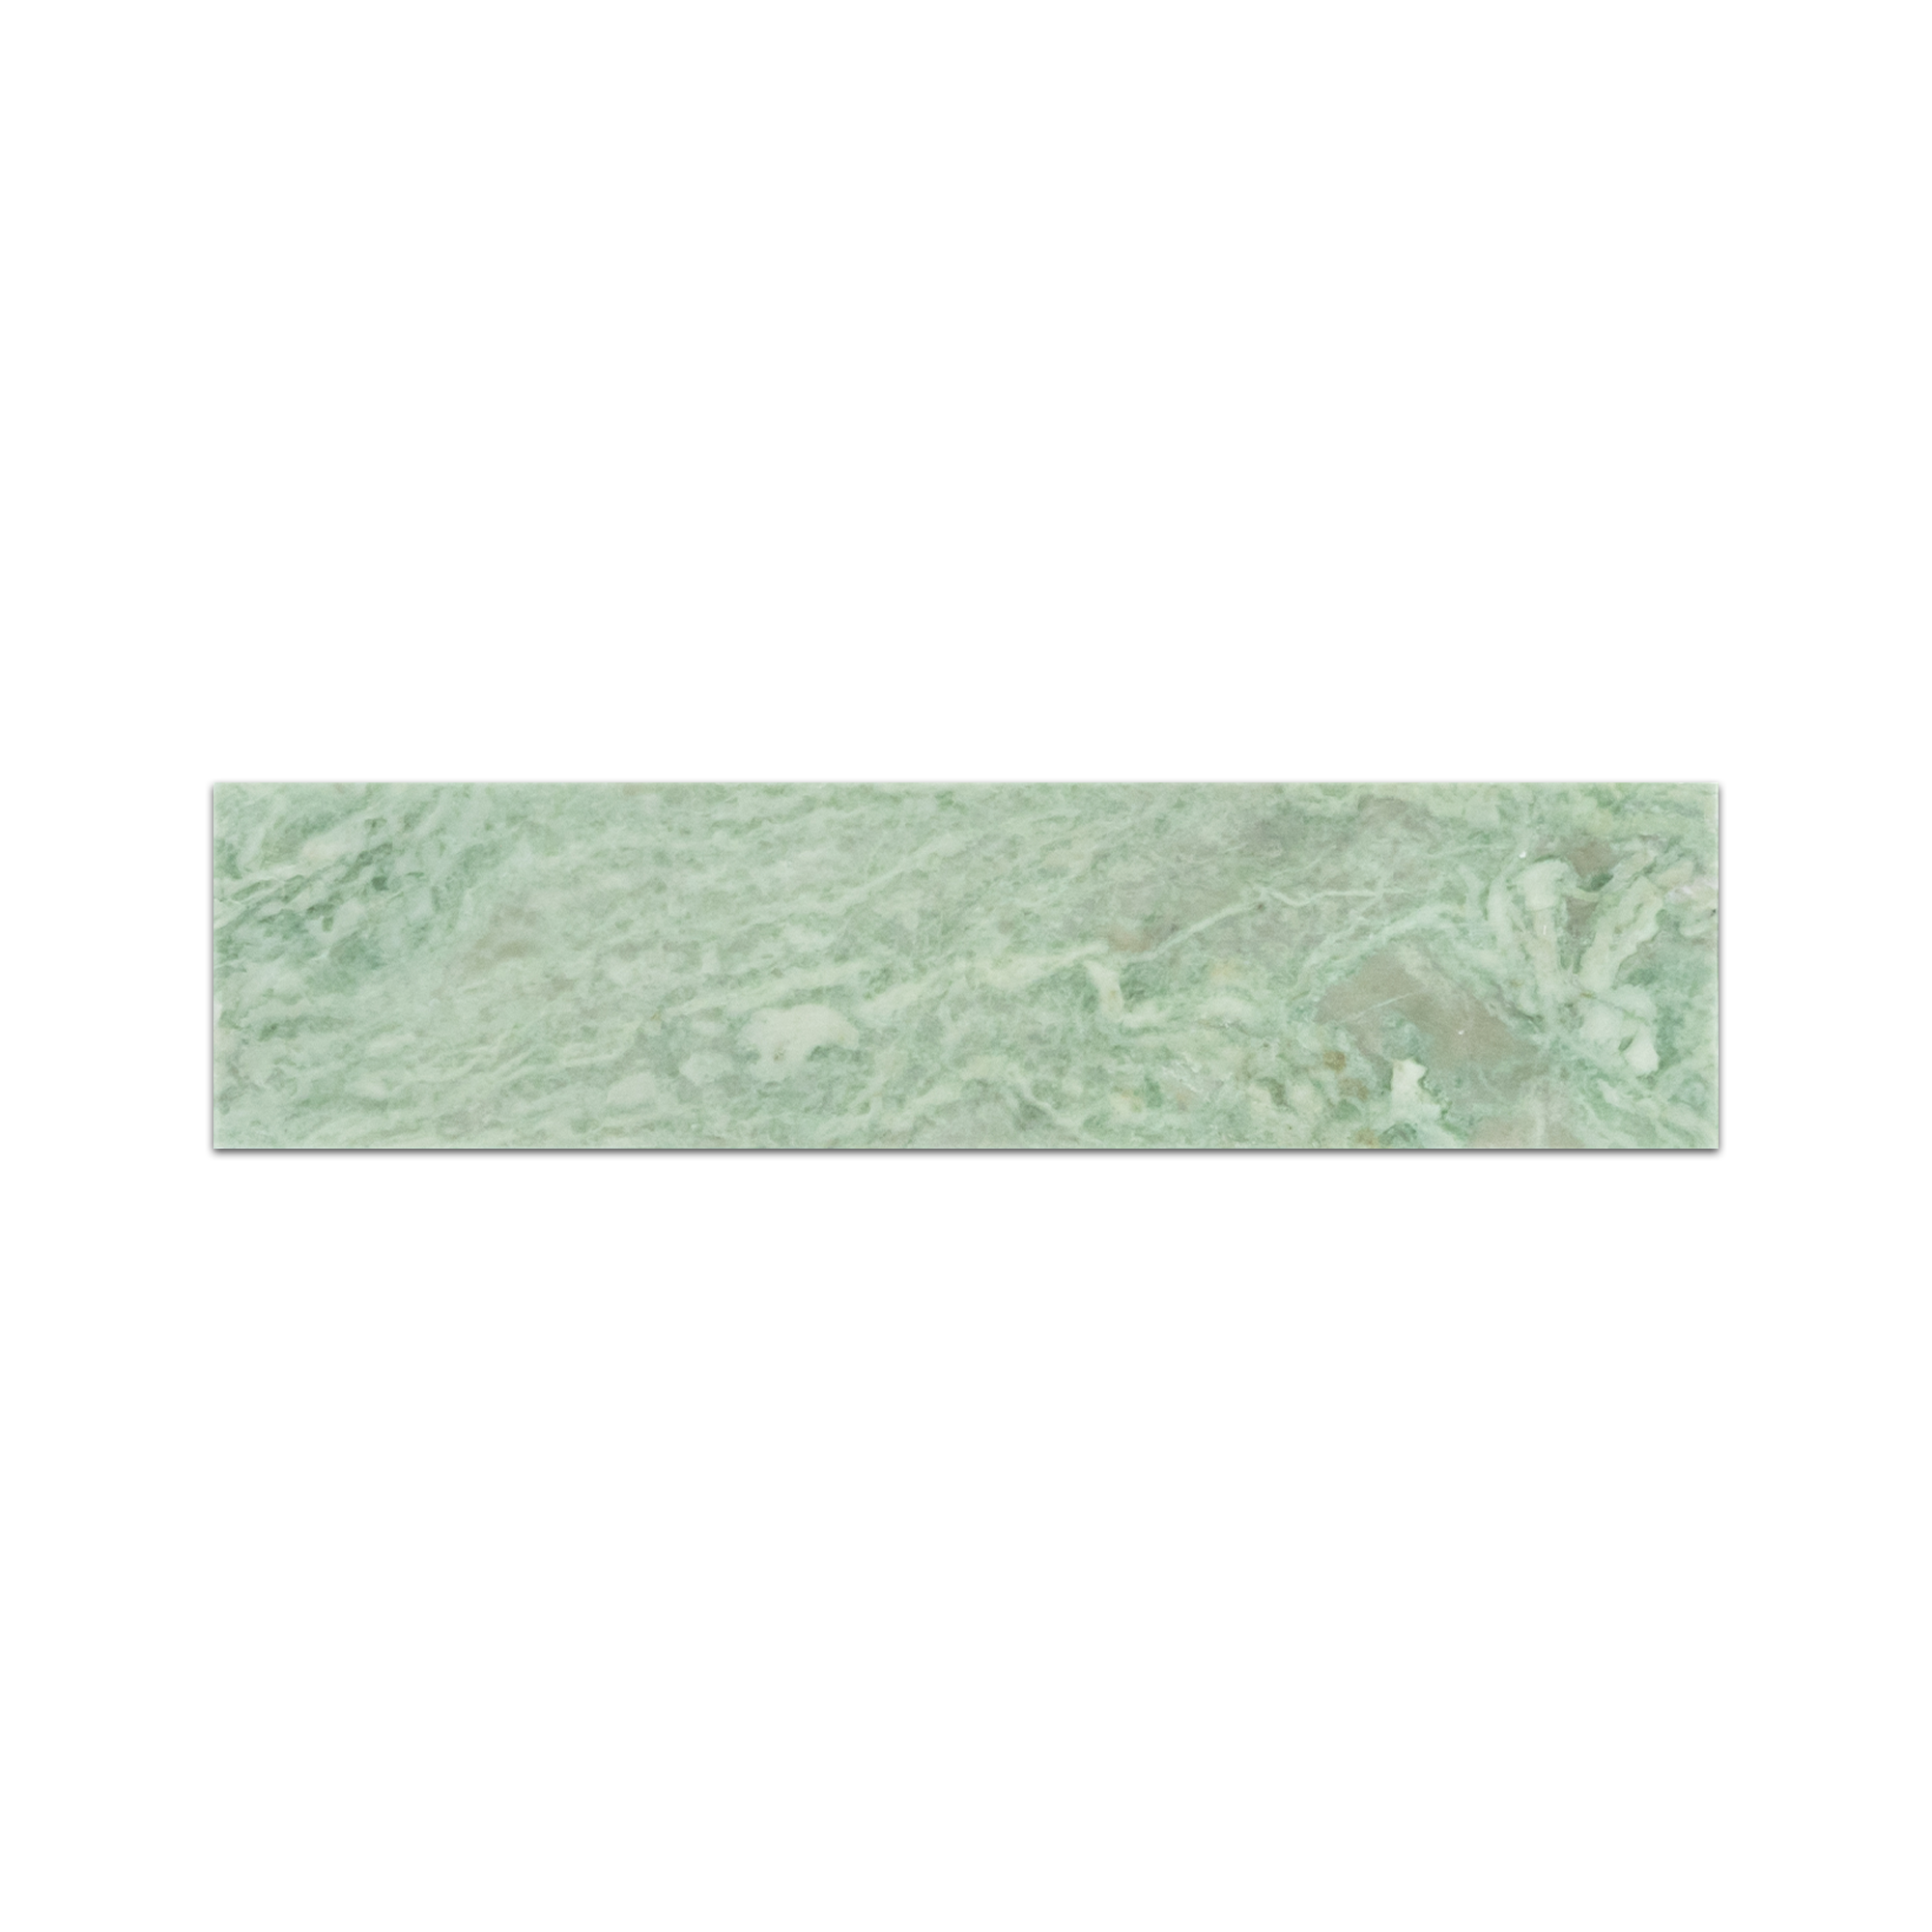 Elon emerald green marble rectangle field tile 3x12x0.375 honed AM6613H Surface Group International product